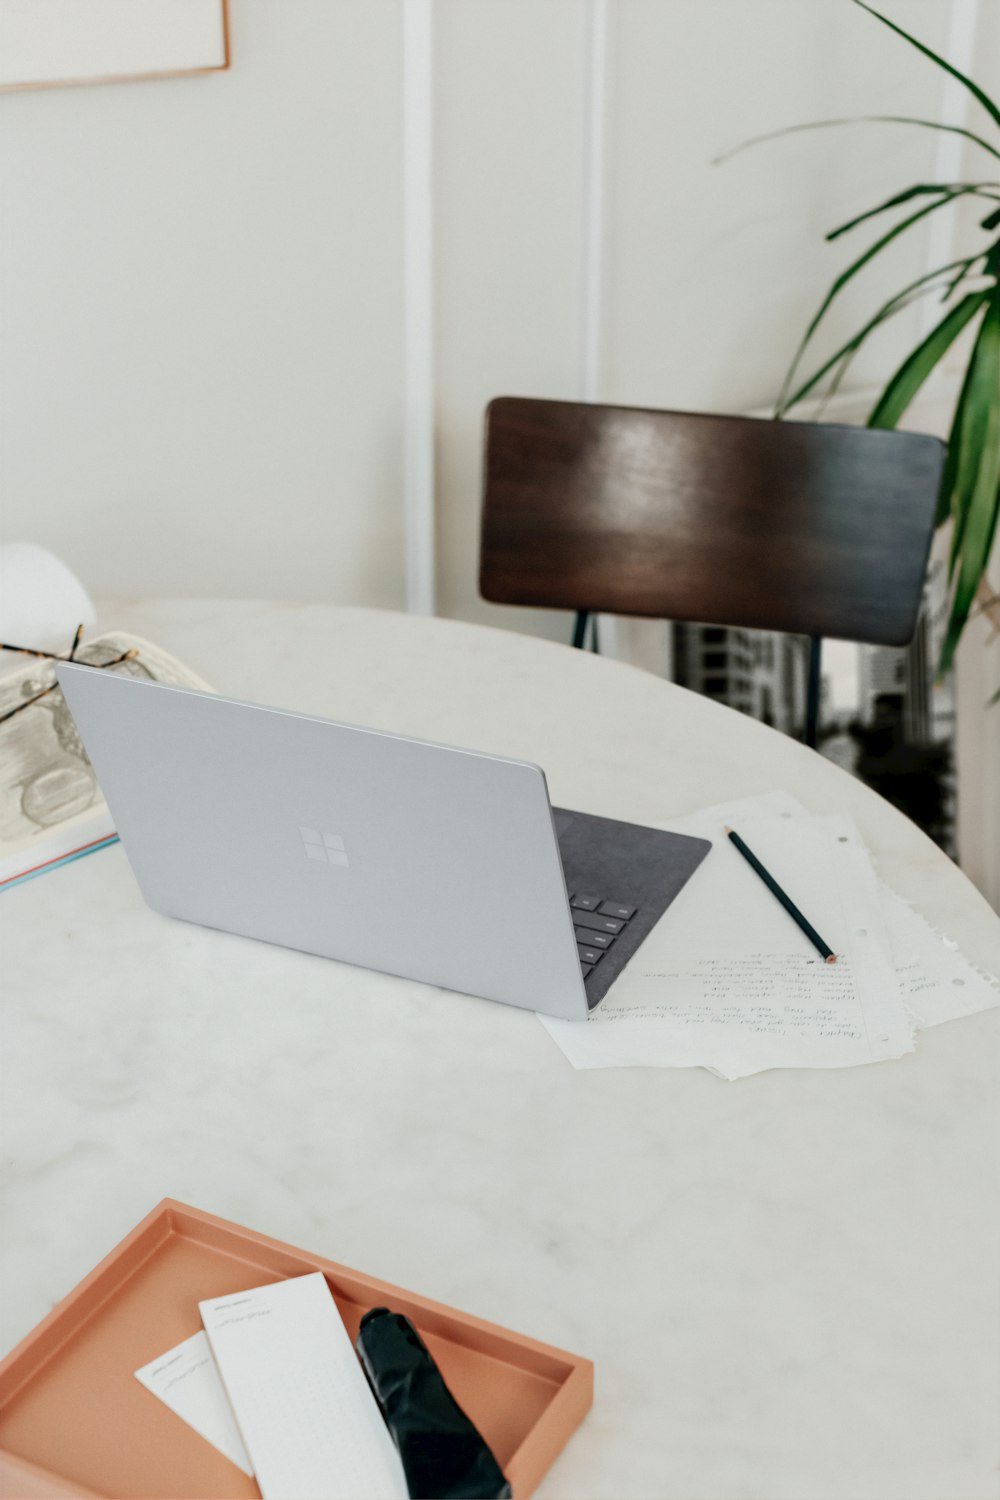 silver microsoft surface laptop on white table